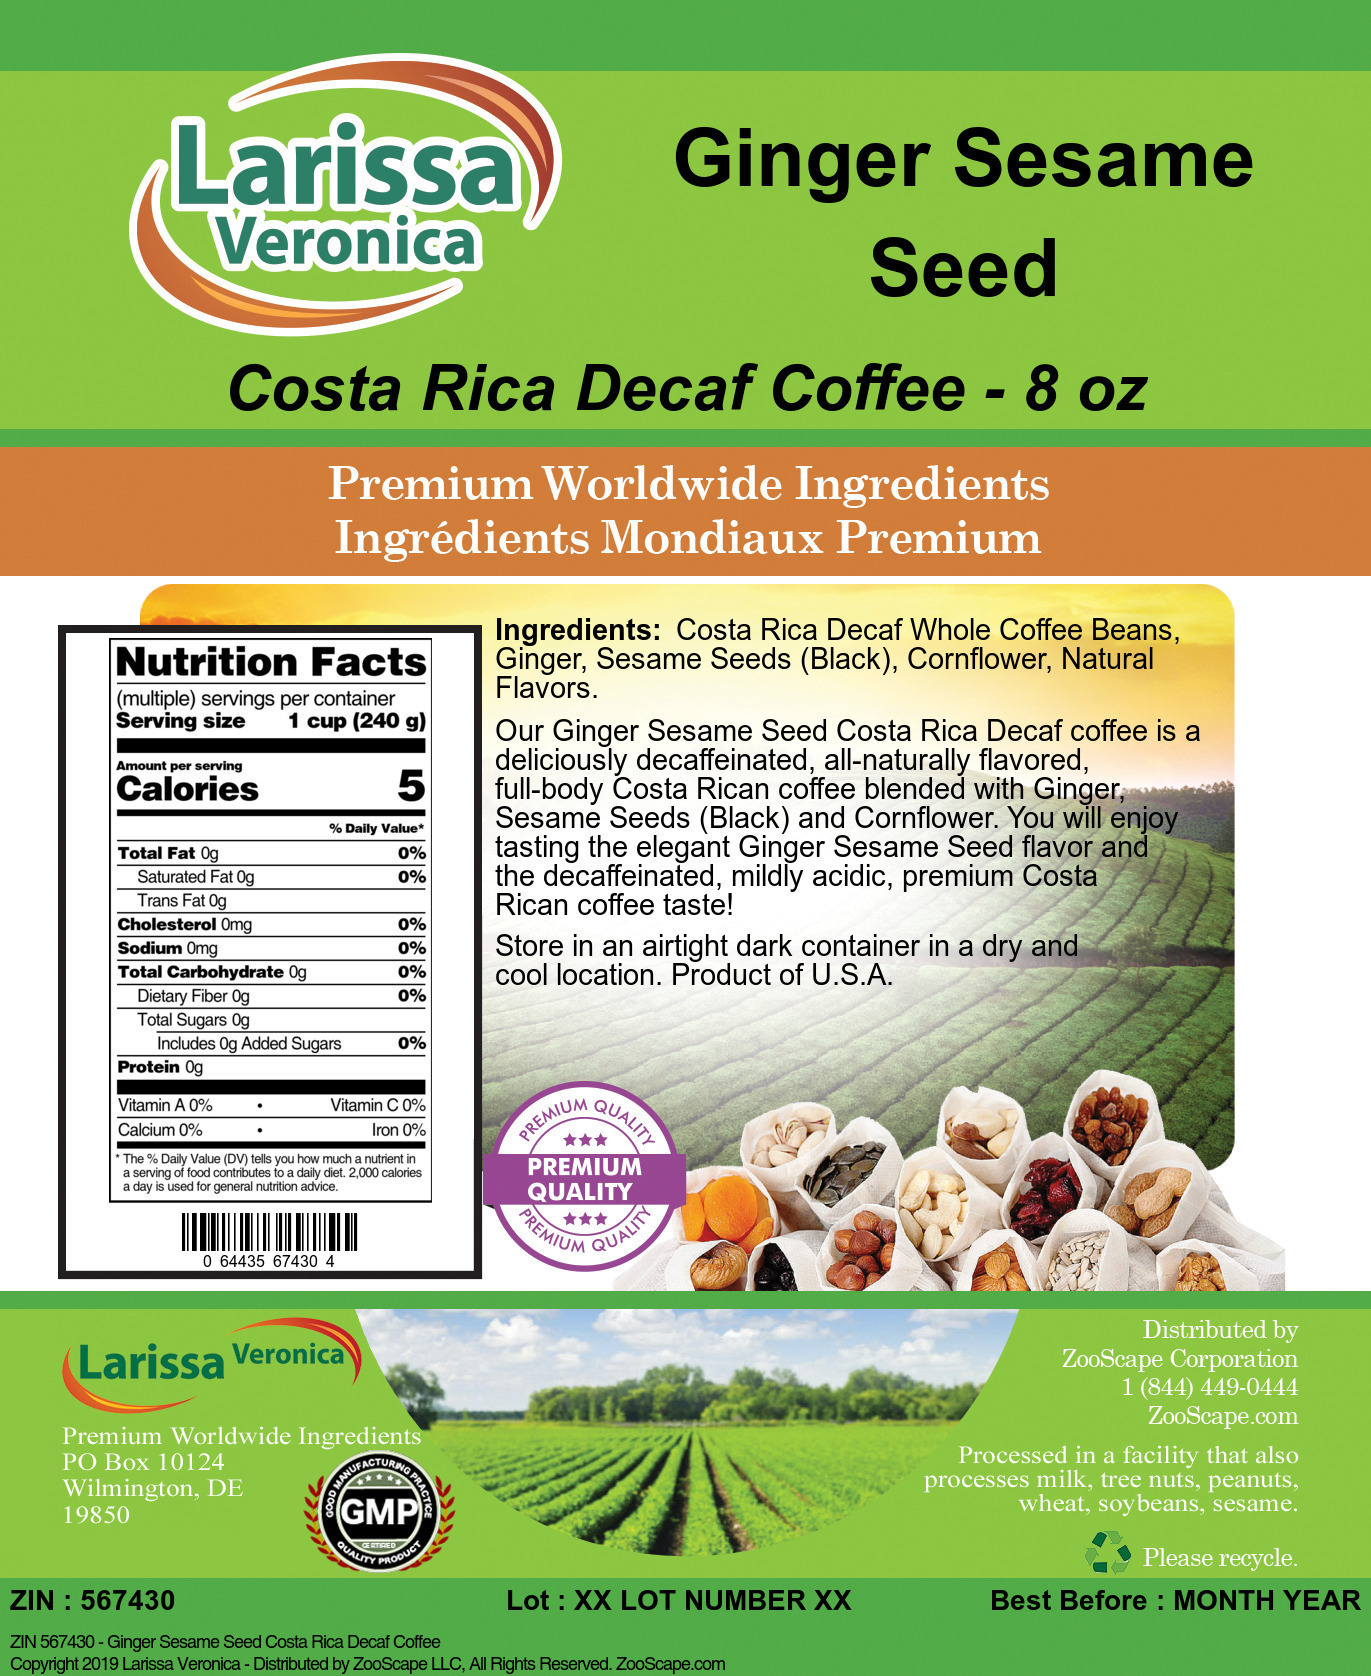 Ginger Sesame Seed Costa Rica Decaf Coffee - Label